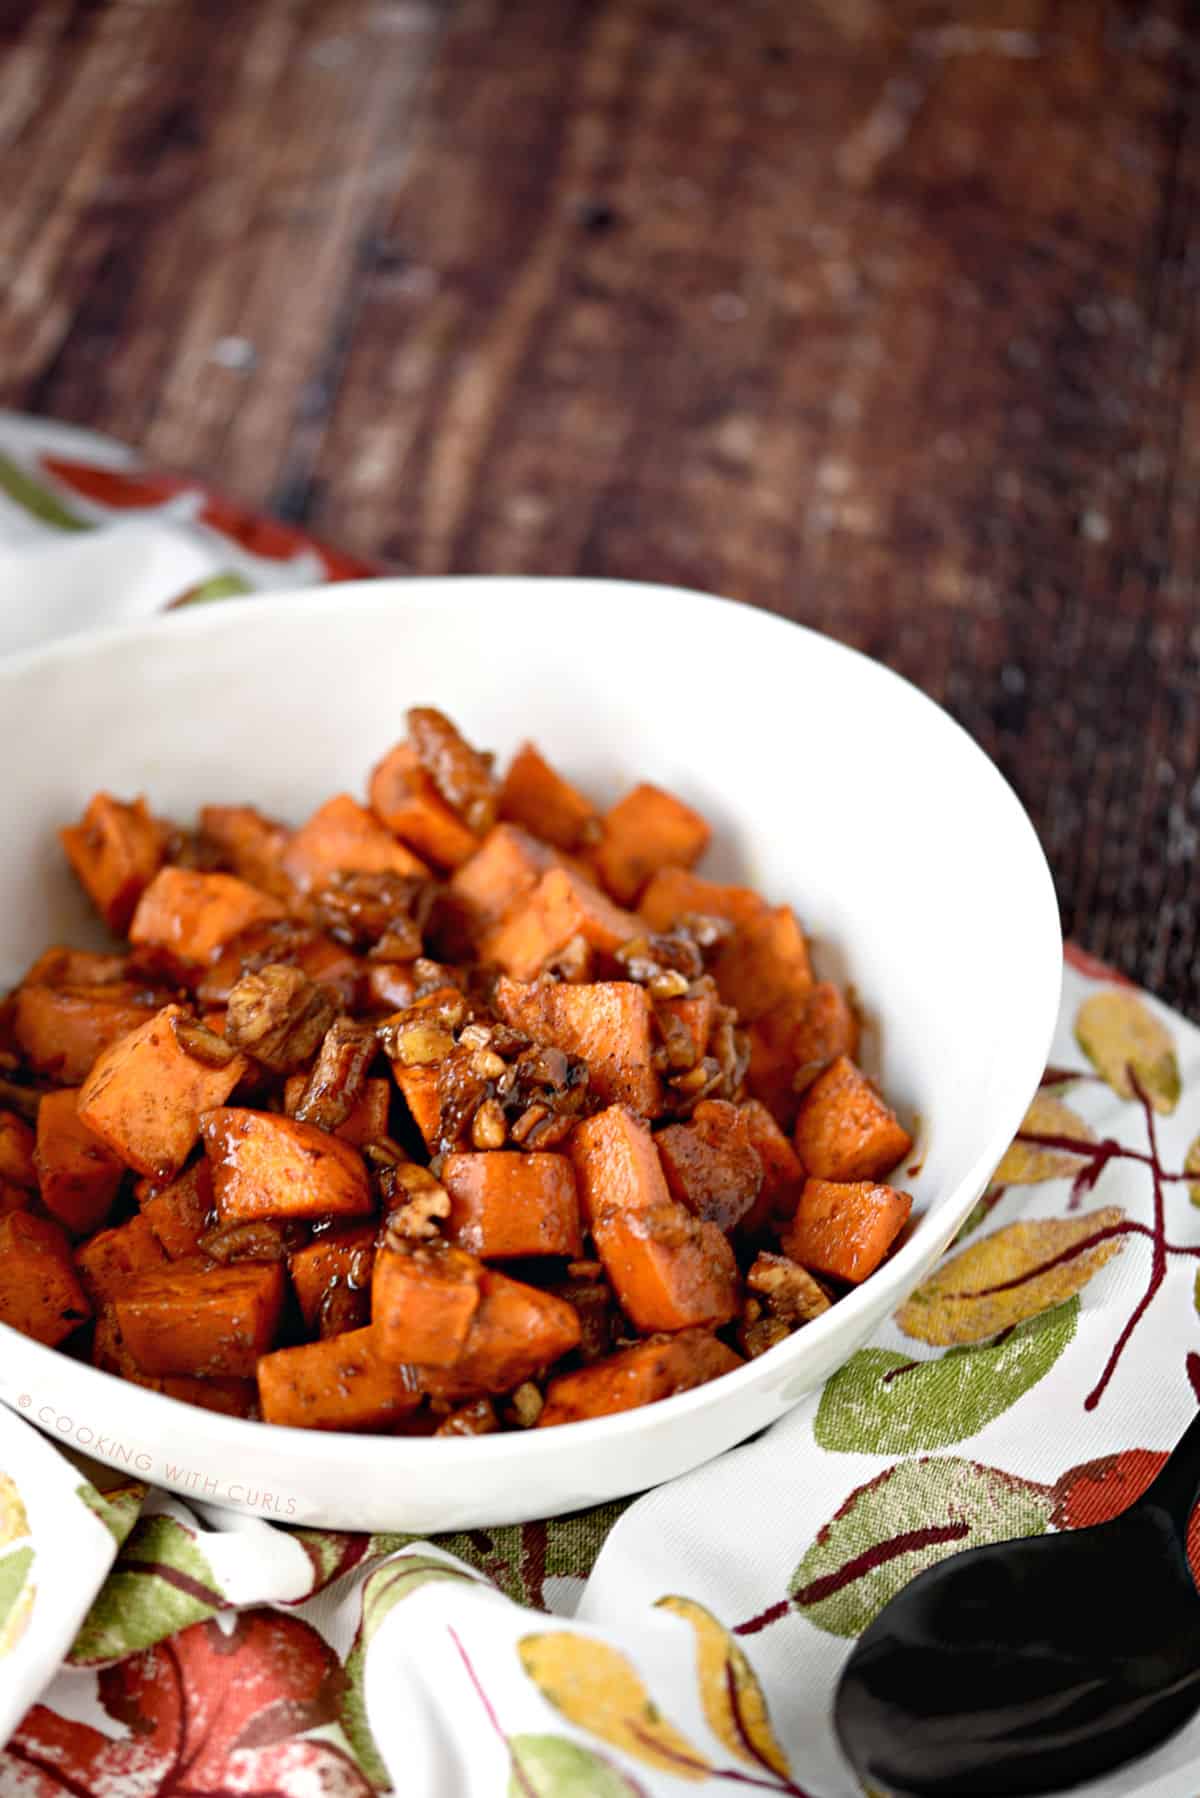 yam cubes tossed with pecans, butter, sugar and spices in a white bowl that is sitting on a fall leaves napkin.